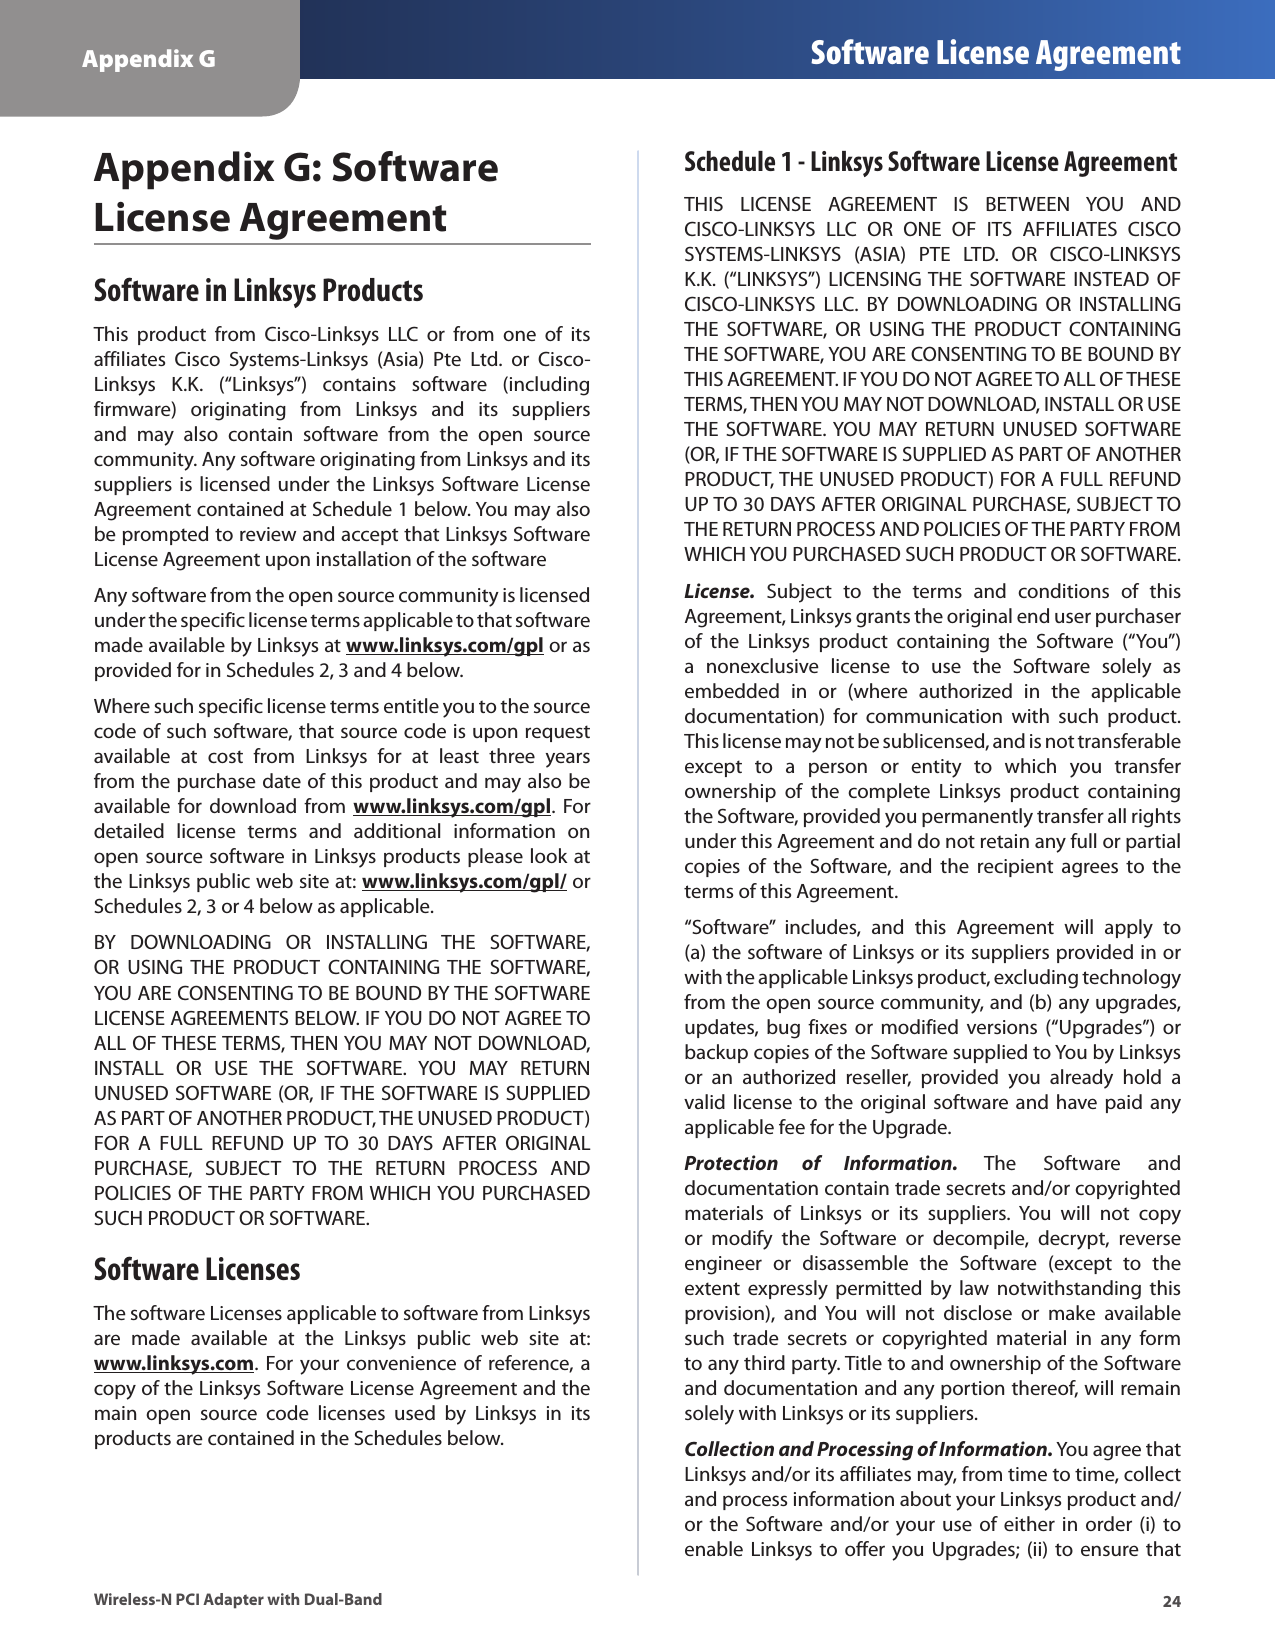 24Appendix G Software License AgreementWireless-N PCI Adapter with Dual-BandAppendix G: Software License AgreementSoftware in Linksys ProductsThis  product  from  Cisco-Linksys  LLC  or  from  one  of  its affiliates  Cisco  Systems-Linksys  (Asia)  Pte  Ltd.  or  Cisco-Linksys  K.K.  (“Linksys”)  contains  software  (including firmware)  originating  from  Linksys  and  its  suppliers and  may  also  contain  software  from  the  open  source community. Any software originating from Linksys and its suppliers is licensed under  the  Linksys Software License Agreement contained at Schedule 1 below. You may also be prompted to review and accept that Linksys Software License Agreement upon installation of the softwareAny software from the open source community is licensed under the specific license terms applicable to that software made available by Linksys at www.linksys.com/gpl or as provided for in Schedules 2, 3 and 4 below.Where such specific license terms entitle you to the source code of such software, that source code is upon request available  at  cost  from  Linksys  for  at  least  three  years from the purchase date of this product and may also be available for  download  from www.linksys.com/gpl.  For detailed  license  terms  and  additional  information  on open source software in Linksys products please look at the Linksys public web site at: www.linksys.com/gpl/ or Schedules 2, 3 or 4 below as applicable.BY  DOWNLOADING  OR  INSTALLING  THE  SOFTWARE, OR  USING  THE  PRODUCT  CONTAINING  THE  SOFTWARE, YOU ARE CONSENTING TO BE BOUND BY THE SOFTWARE LICENSE AGREEMENTS BELOW. IF YOU DO NOT AGREE TO ALL OF THESE TERMS, THEN YOU MAY NOT DOWNLOAD, INSTALL  OR  USE  THE  SOFTWARE.  YOU  MAY  RETURN UNUSED SOFTWARE (OR, IF THE SOFTWARE IS SUPPLIED AS PART OF ANOTHER PRODUCT, THE UNUSED PRODUCT) FOR  A  FULL  REFUND  UP  TO  30  DAYS  AFTER  ORIGINAL PURCHASE,  SUBJECT  TO  THE  RETURN  PROCESS  AND POLICIES OF THE PARTY FROM WHICH YOU PURCHASED SUCH PRODUCT OR SOFTWARE.Software LicensesThe software Licenses applicable to software from Linksys are  made  available  at  the  Linksys  public  web  site  at: www.linksys.com. For your convenience of reference, a copy of the Linksys Software License Agreement and the main  open  source  code  licenses  used  by  Linksys  in  its products are contained in the Schedules below.Schedule 1 - Linksys Software License AgreementTHIS  LICENSE  AGREEMENT  IS  BETWEEN  YOU  AND CISCO-LINKSYS  LLC  OR  ONE  OF  ITS  AFFILIATES  CISCO SYSTEMS-LINKSYS  (ASIA)  PTE  LTD.  OR  CISCO-LINKSYS K.K.  (“LINKSYS”)  LICENSING THE  SOFTWARE  INSTEAD OF CISCO-LINKSYS  LLC.  BY  DOWNLOADING  OR  INSTALLING THE  SOFTWARE,  OR  USING THE  PRODUCT  CONTAINING THE SOFTWARE, YOU ARE CONSENTING TO BE BOUND BY THIS AGREEMENT. IF YOU DO NOT AGREE TO ALL OF THESE TERMS, THEN YOU MAY NOT DOWNLOAD, INSTALL OR USE THE  SOFTWARE. YOU  MAY  RETURN  UNUSED SOFTWARE (OR, IF THE SOFTWARE IS SUPPLIED AS PART OF ANOTHER PRODUCT, THE UNUSED PRODUCT) FOR A FULL REFUND UP TO 30 DAYS AFTER ORIGINAL PURCHASE, SUBJECT TO THE RETURN PROCESS AND POLICIES OF THE PARTY FROM WHICH YOU PURCHASED SUCH PRODUCT OR SOFTWARE.License.  Subject  to  the  terms  and  conditions  of  this Agreement, Linksys grants the original end user purchaser of  the  Linksys  product  containing  the  Software  (“You”) a  nonexclusive  license  to  use  the  Software  solely  as embedded  in  or  (where  authorized  in  the  applicable documentation)  for  communication  with  such  product. This license may not be sublicensed, and is not transferable except  to  a  person  or  entity  to  which  you  transfer ownership  of  the  complete  Linksys  product  containing the Software, provided you permanently transfer all rights under this Agreement and do not retain any full or partial copies  of  the  Software,  and  the  recipient  agrees  to  the terms of this Agreement.“Software”  includes,  and  this  Agreement  will  apply  to (a) the software of Linksys or its suppliers provided in or with the applicable Linksys product, excluding technology from the open source community, and (b) any upgrades, updates, bug  fixes  or  modified versions  (“Upgrades”)  or backup copies of the Software supplied to You by Linksys or  an  authorized  reseller,  provided  you  already  hold  a valid license to the original  software and have paid any applicable fee for the Upgrade.Protection  of  Information.  The  Software  and documentation contain trade secrets and/or copyrighted materials  of  Linksys  or  its  suppliers.  You  will  not  copy or  modify  the  Software  or  decompile,  decrypt,  reverse engineer  or  disassemble  the  Software  (except  to  the extent  expressly permitted  by  law  notwithstanding  this provision),  and  You  will  not  disclose  or  make  available such  trade  secrets  or  copyrighted  material  in  any  form to any third party. Title to and ownership of the Software and documentation and any portion thereof, will remain solely with Linksys or its suppliers.Collection and Processing of Information. You agree that Linksys and/or its affiliates may, from time to time, collect and process information about your Linksys product and/or the  Software and/or your use  of either in order  (i)  to enable Linksys to offer you Upgrades; (ii) to ensure that 